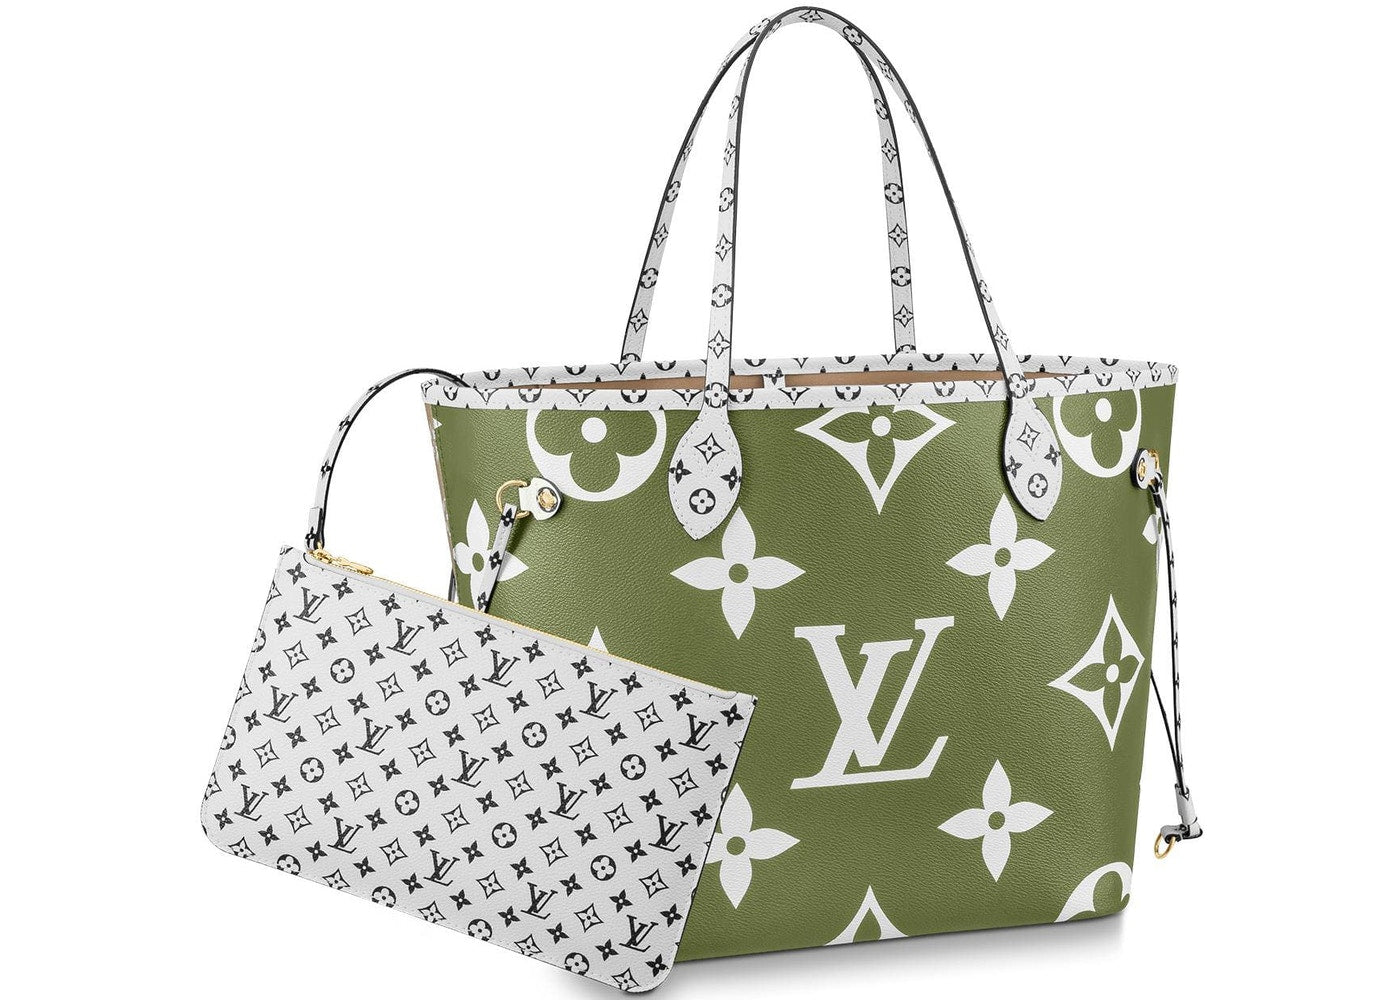 Wardrobe Essentials: What Purses Should Every Woman Own? lv neverfull